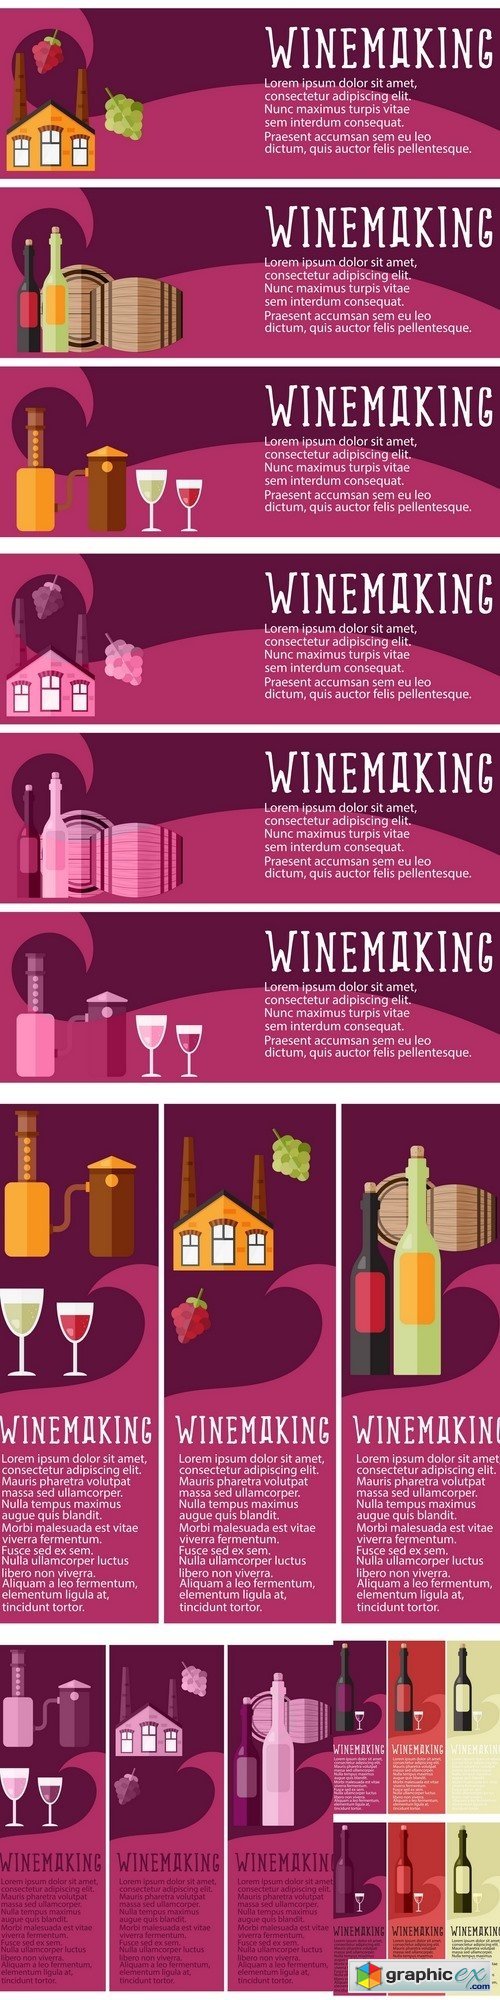 Set of banner for winemaking industry with winemaking